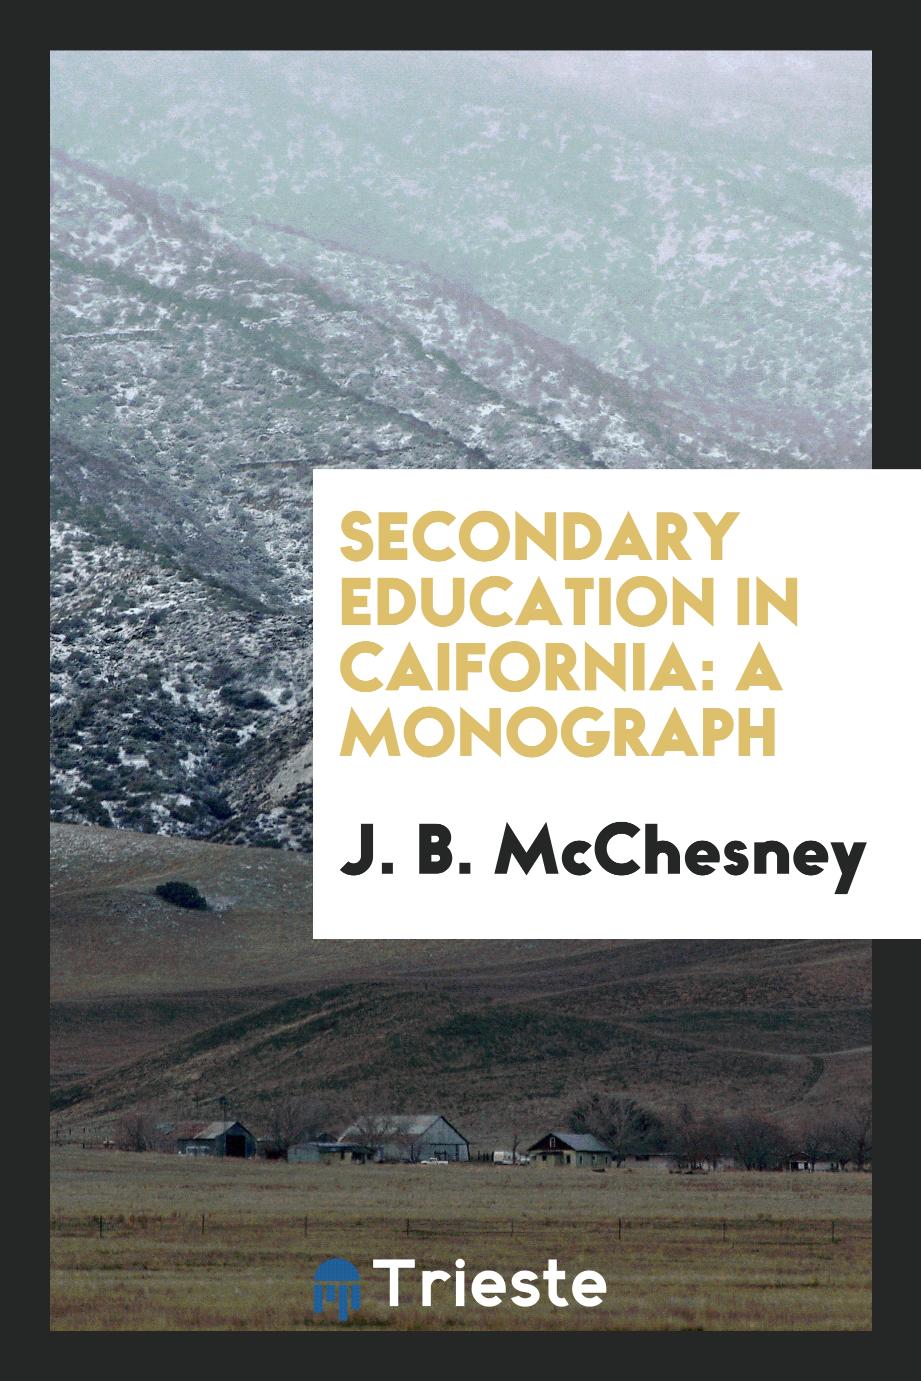 Secondary education in Caifornia: a monograph